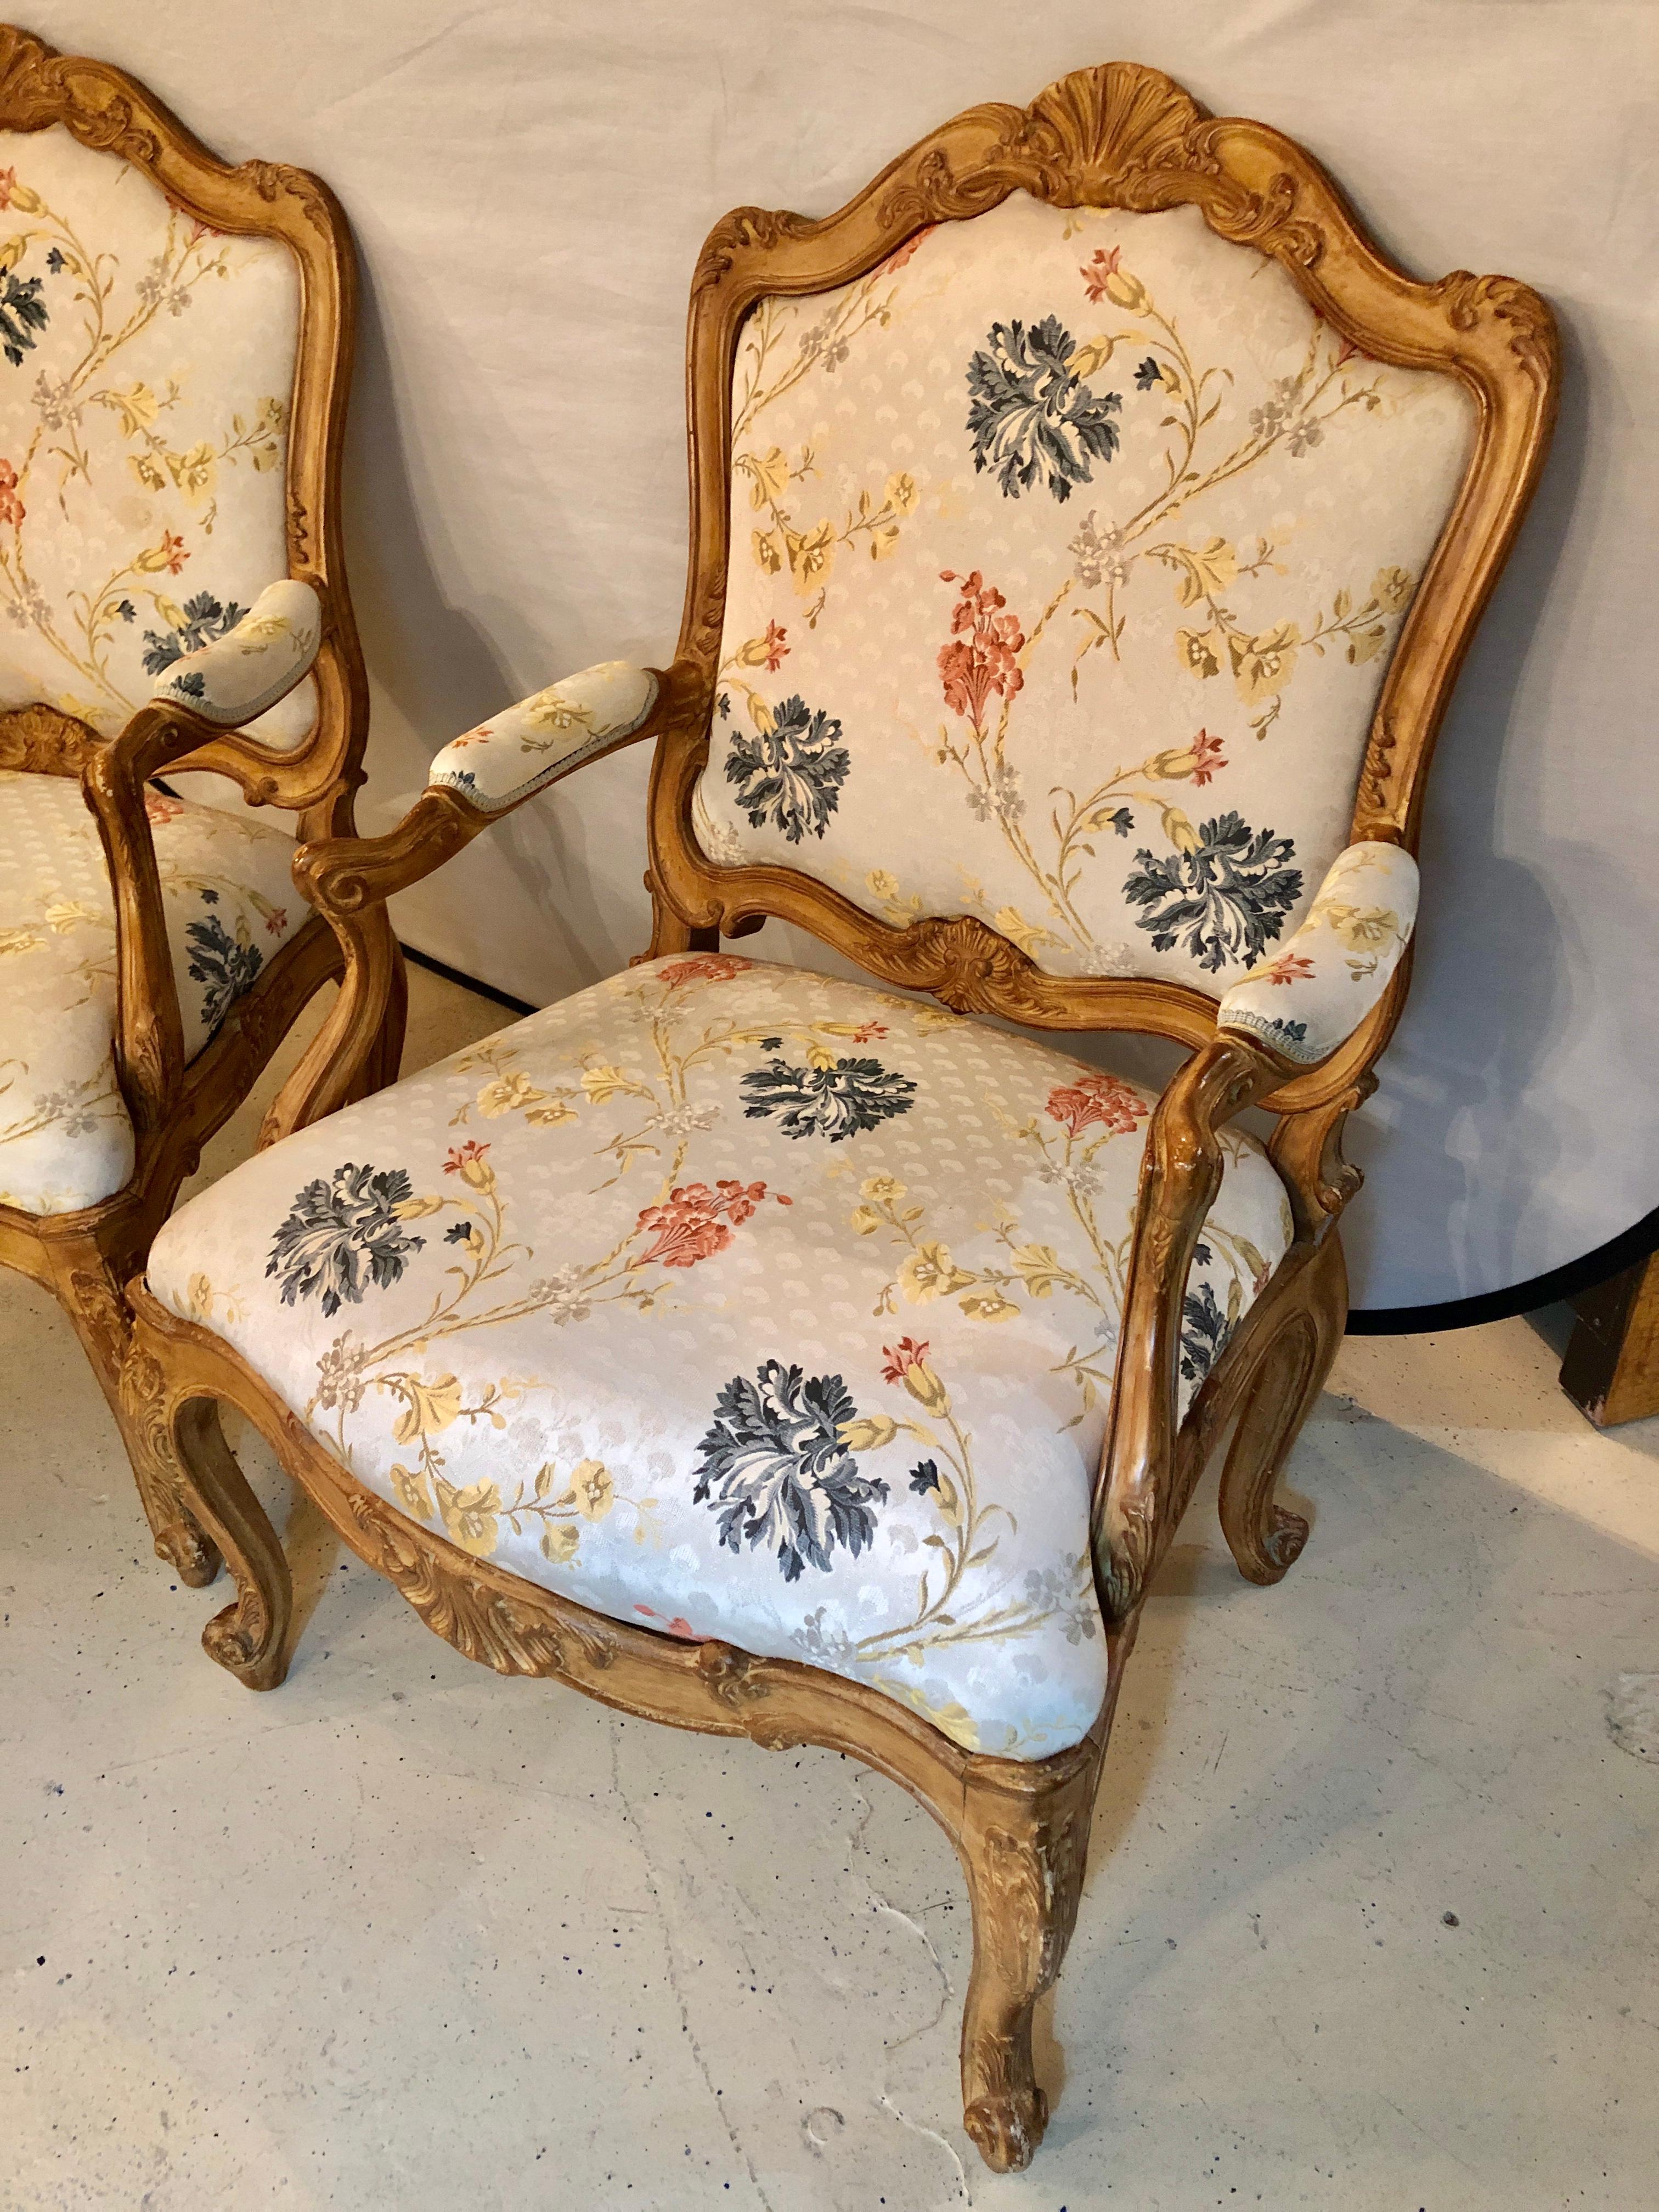 Pair of fine Louis XV style armchairs in fine upholstery custom frames. These wonderfully shell motif carved and finely recovered armchairs are simply stunning and are certain to add style and glamour to any room in the home or office.